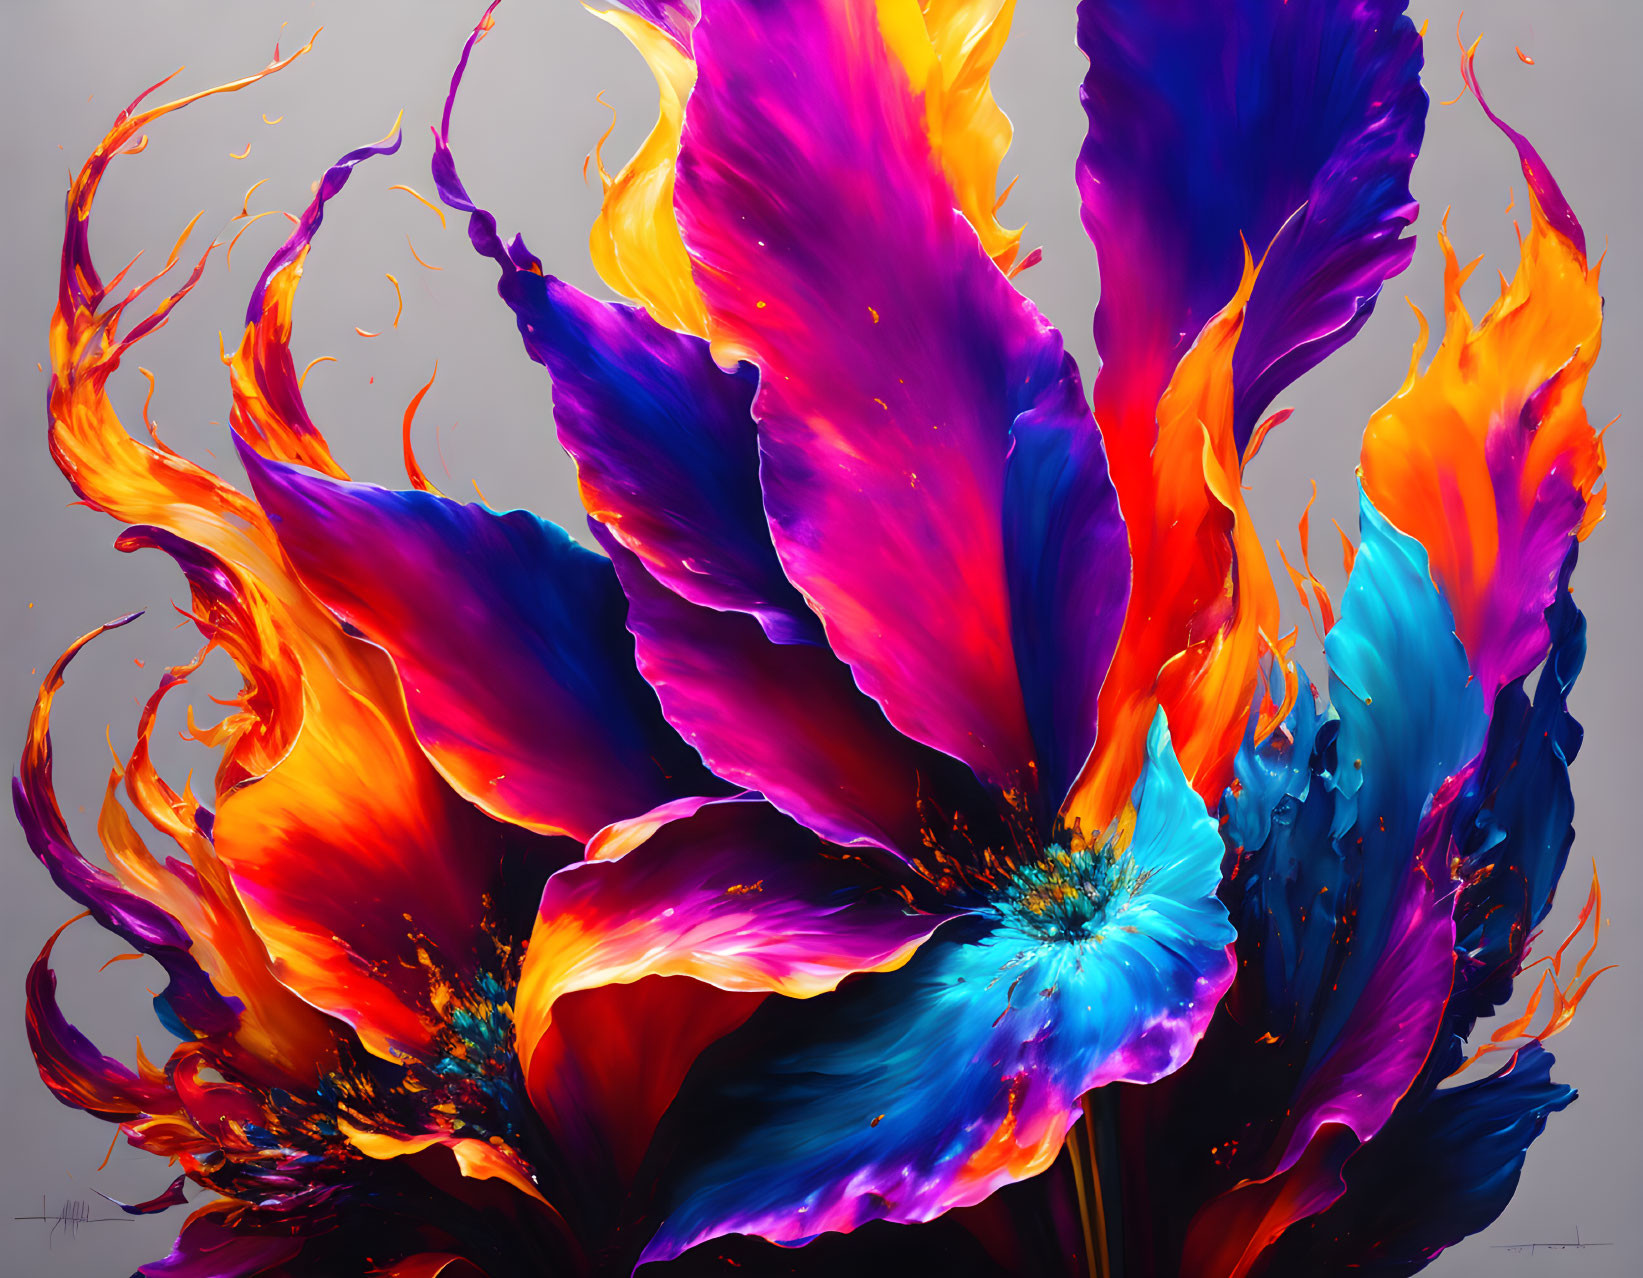 Colorful Abstract Painting: Fiery Orange and Yellow Flowers Merge with Purple and Blue